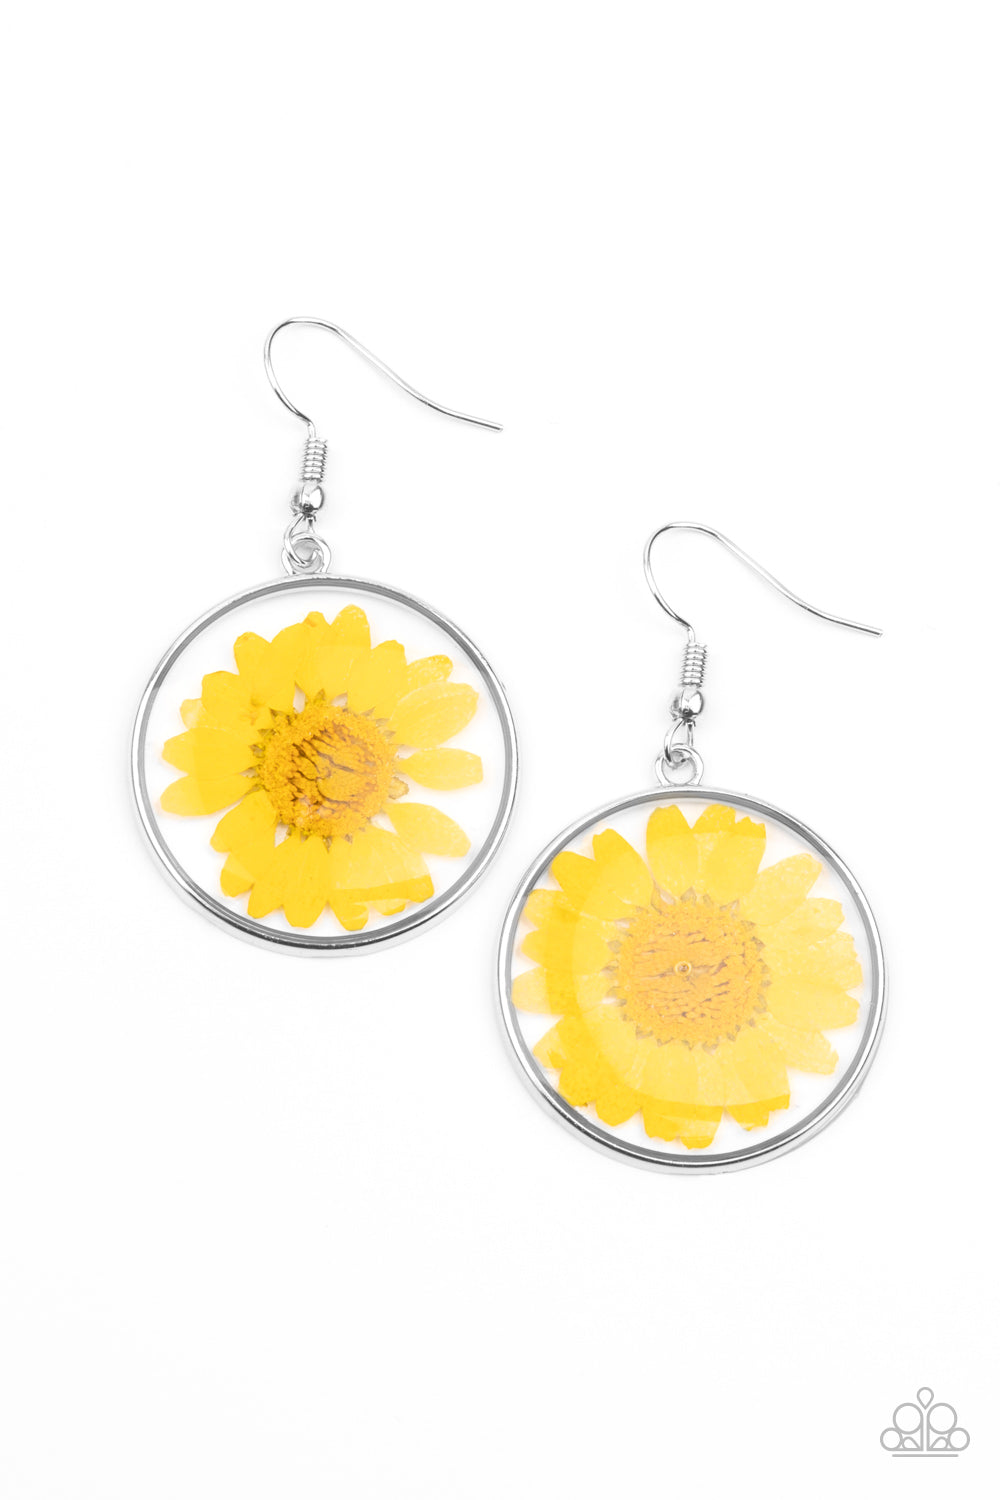 Forever Florals - Yellow Earrings - Princess Glam Shop